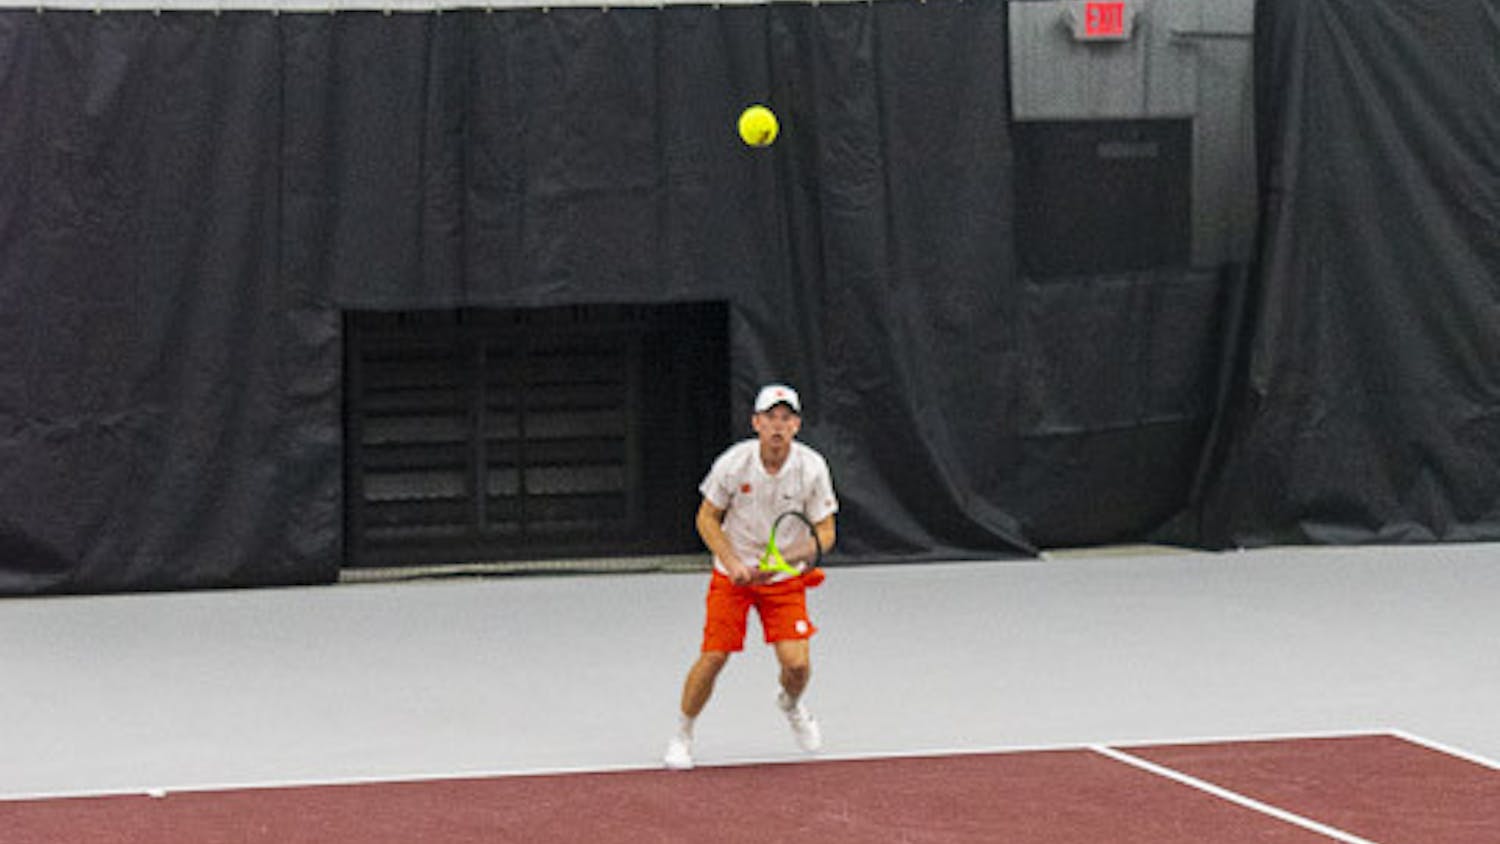 Junior Connor Thomson serves the ball over to his Clemson opponent during a doubles tournament at the Carolina Indoor Tennis Facility on Feb. 3, 2022. The Gamecocks beat the Tigers 7-0, marking the third consecutive year South Carolina has claimed the matchup.